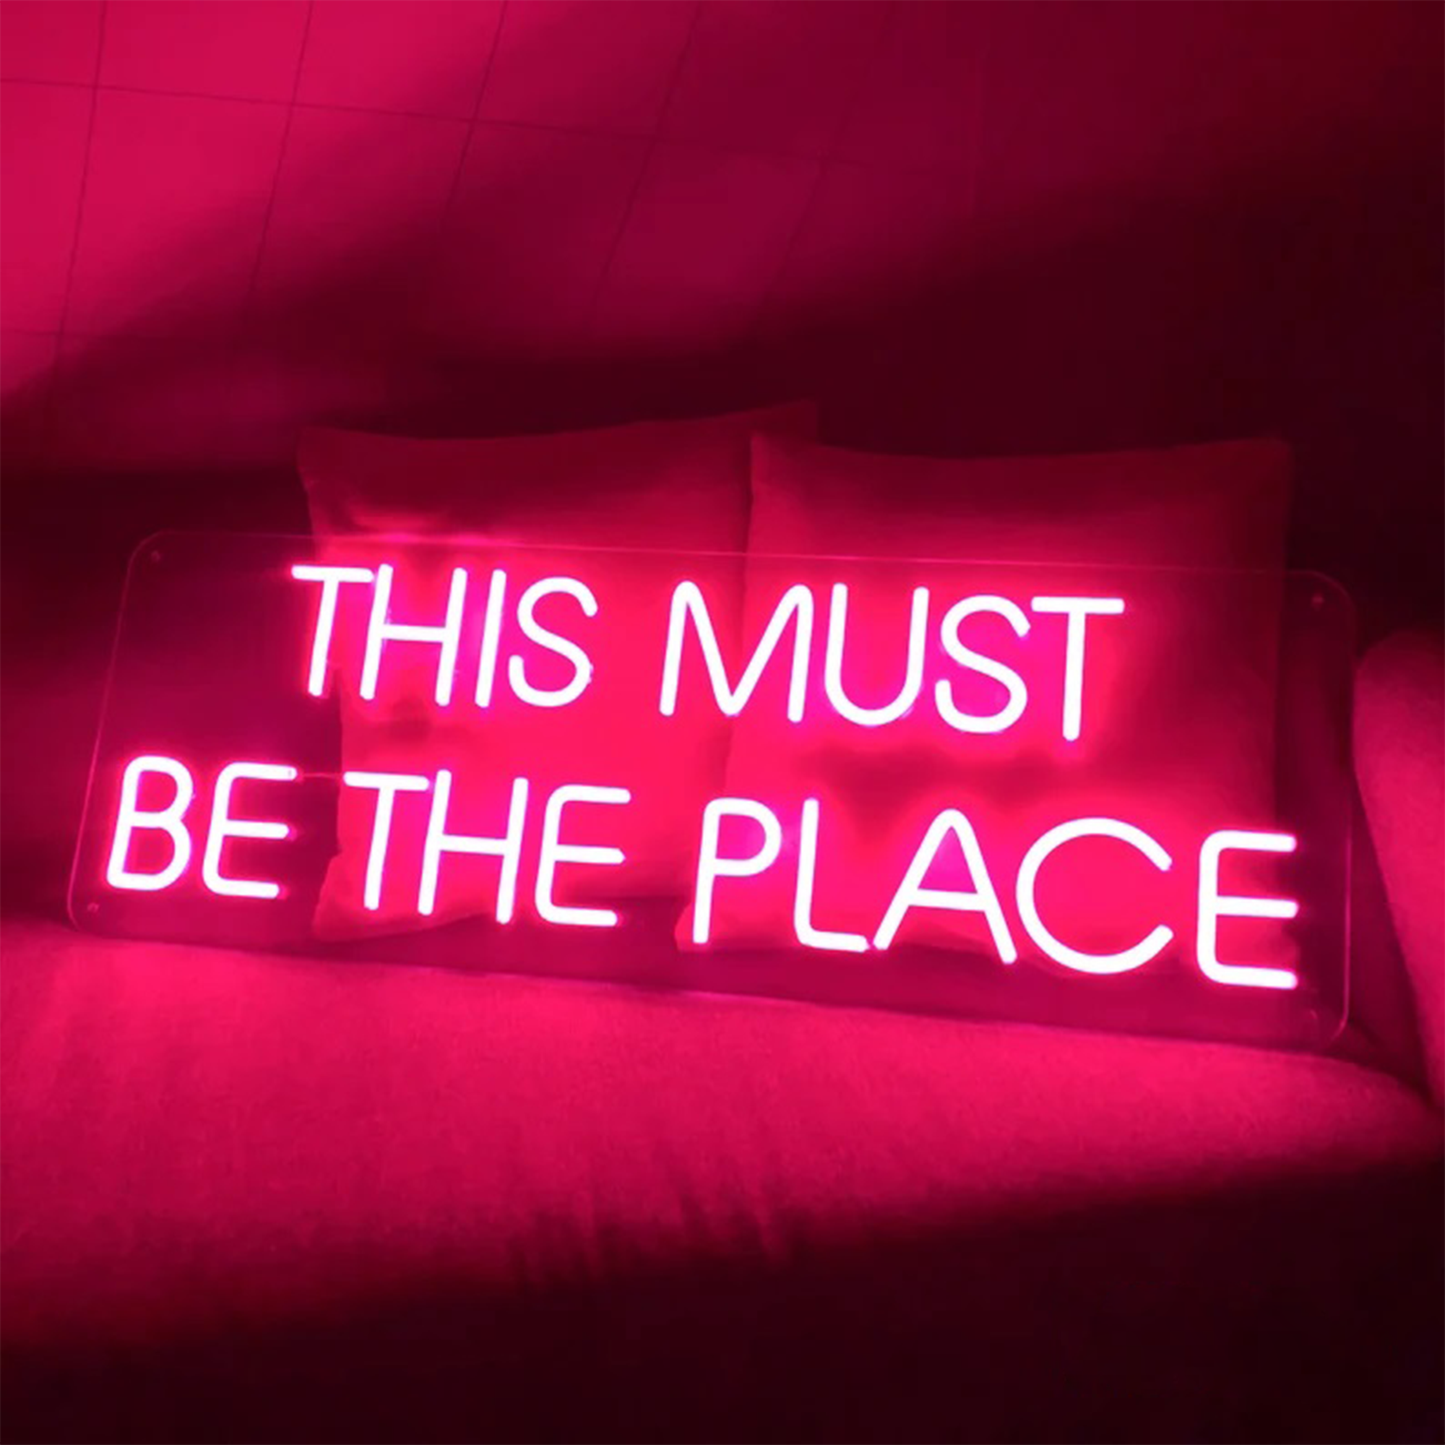 this-must-be-the-place-neon-sign-bar-bedroom-decor-led-neon-light-sign-party-decor-home-room-neon-wall-art-decoration